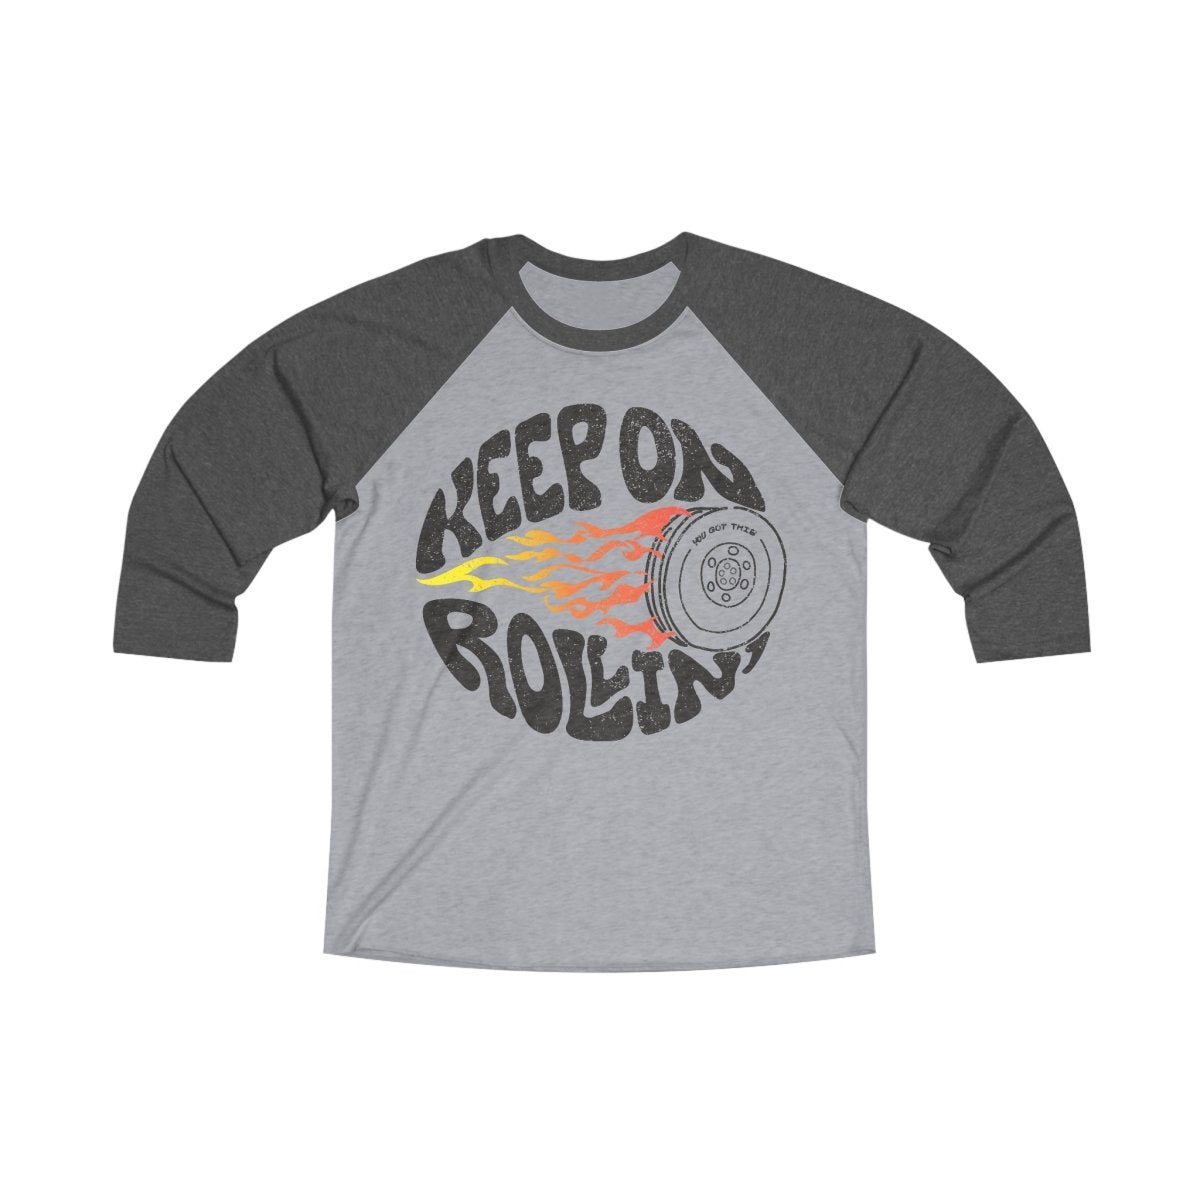 Keep On Rollin 3/4 T-Shirt, You Got This, Adventure or Tough Times Gift